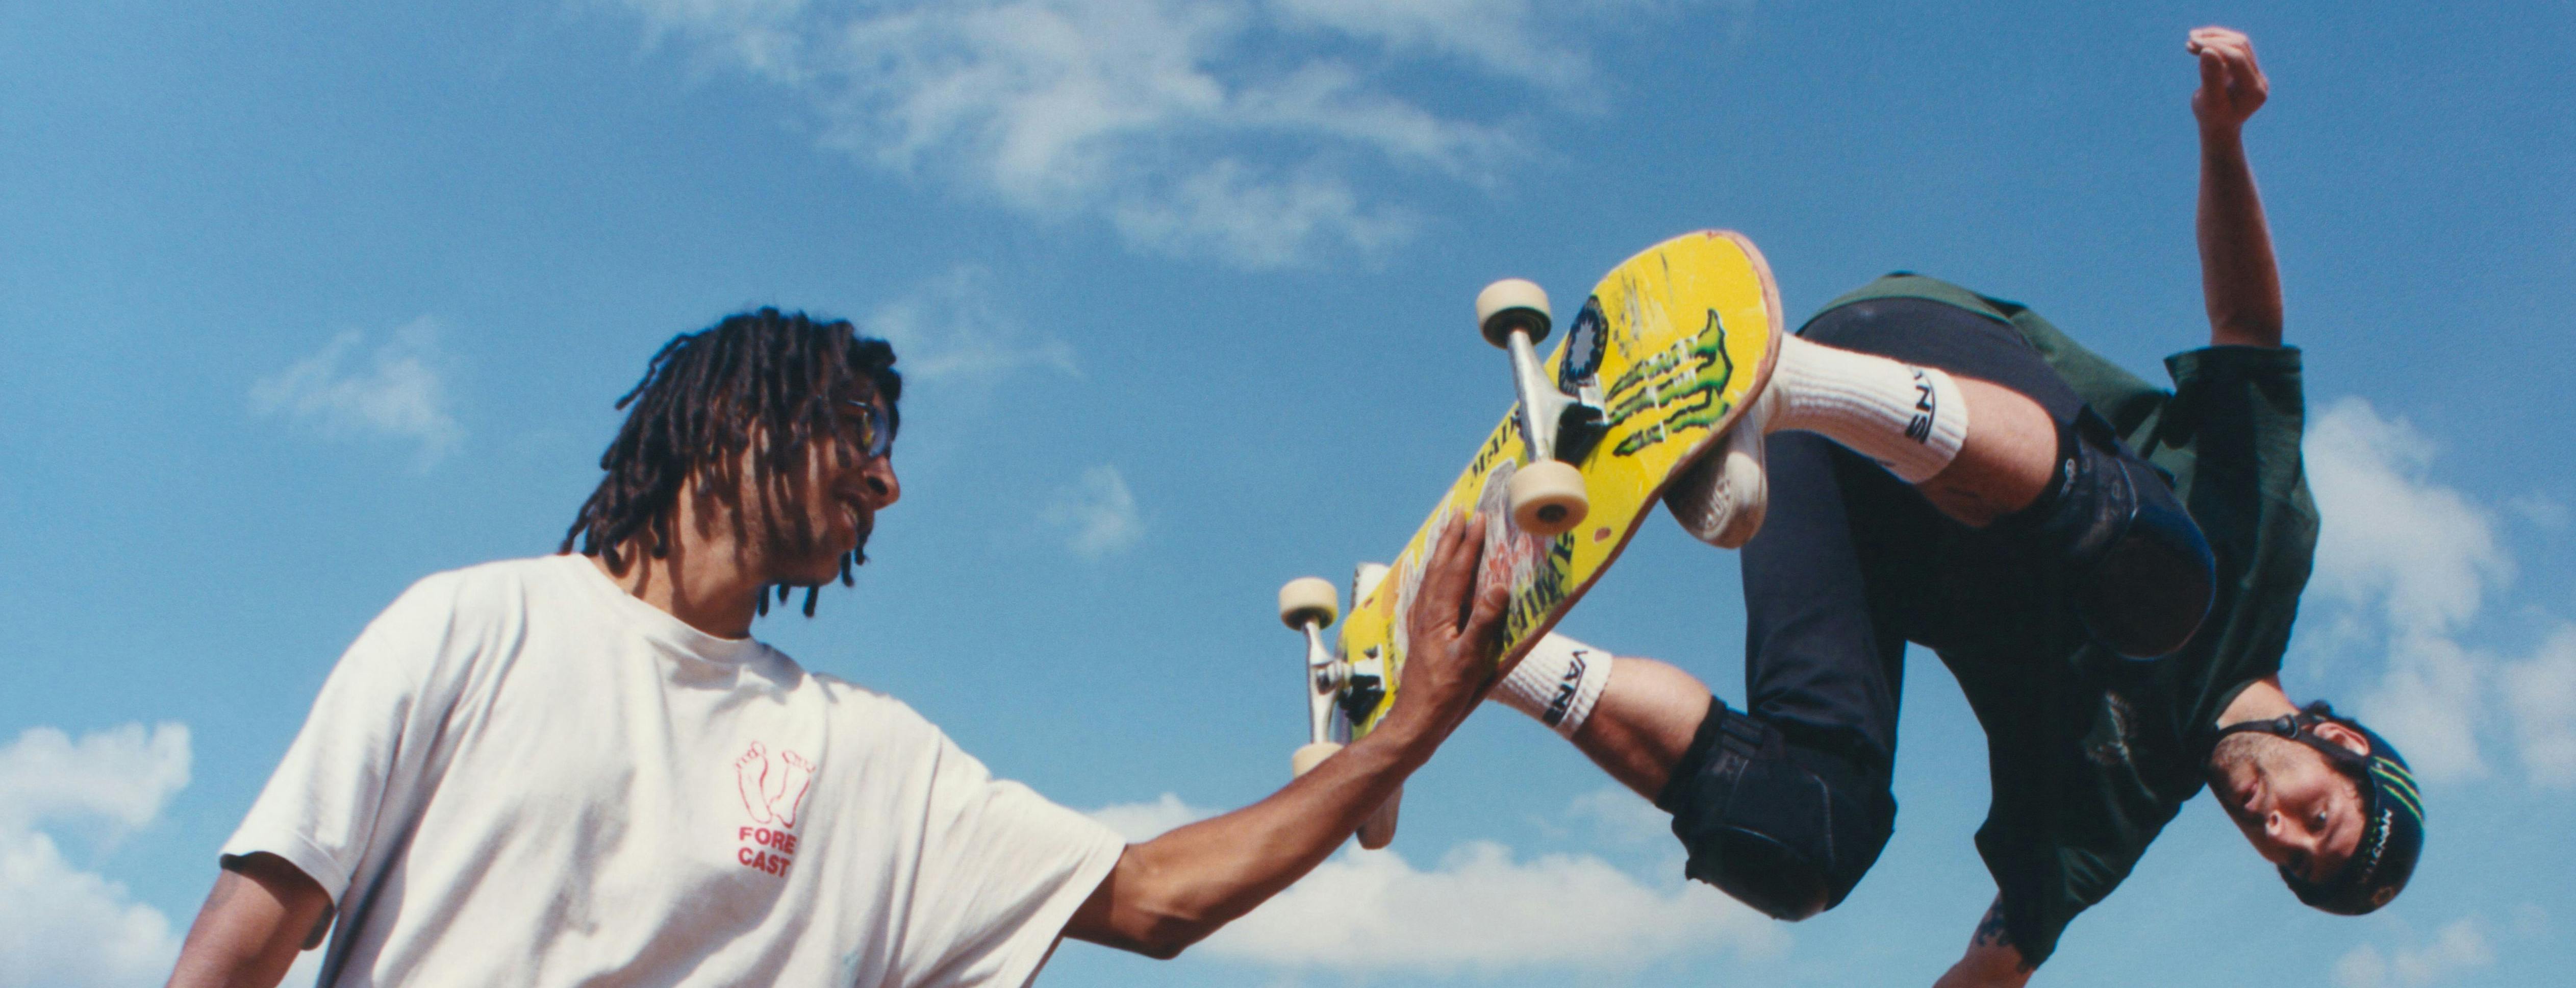 film still/image of two skateboarders on a sunny day in the midst of a trick on a half pipe